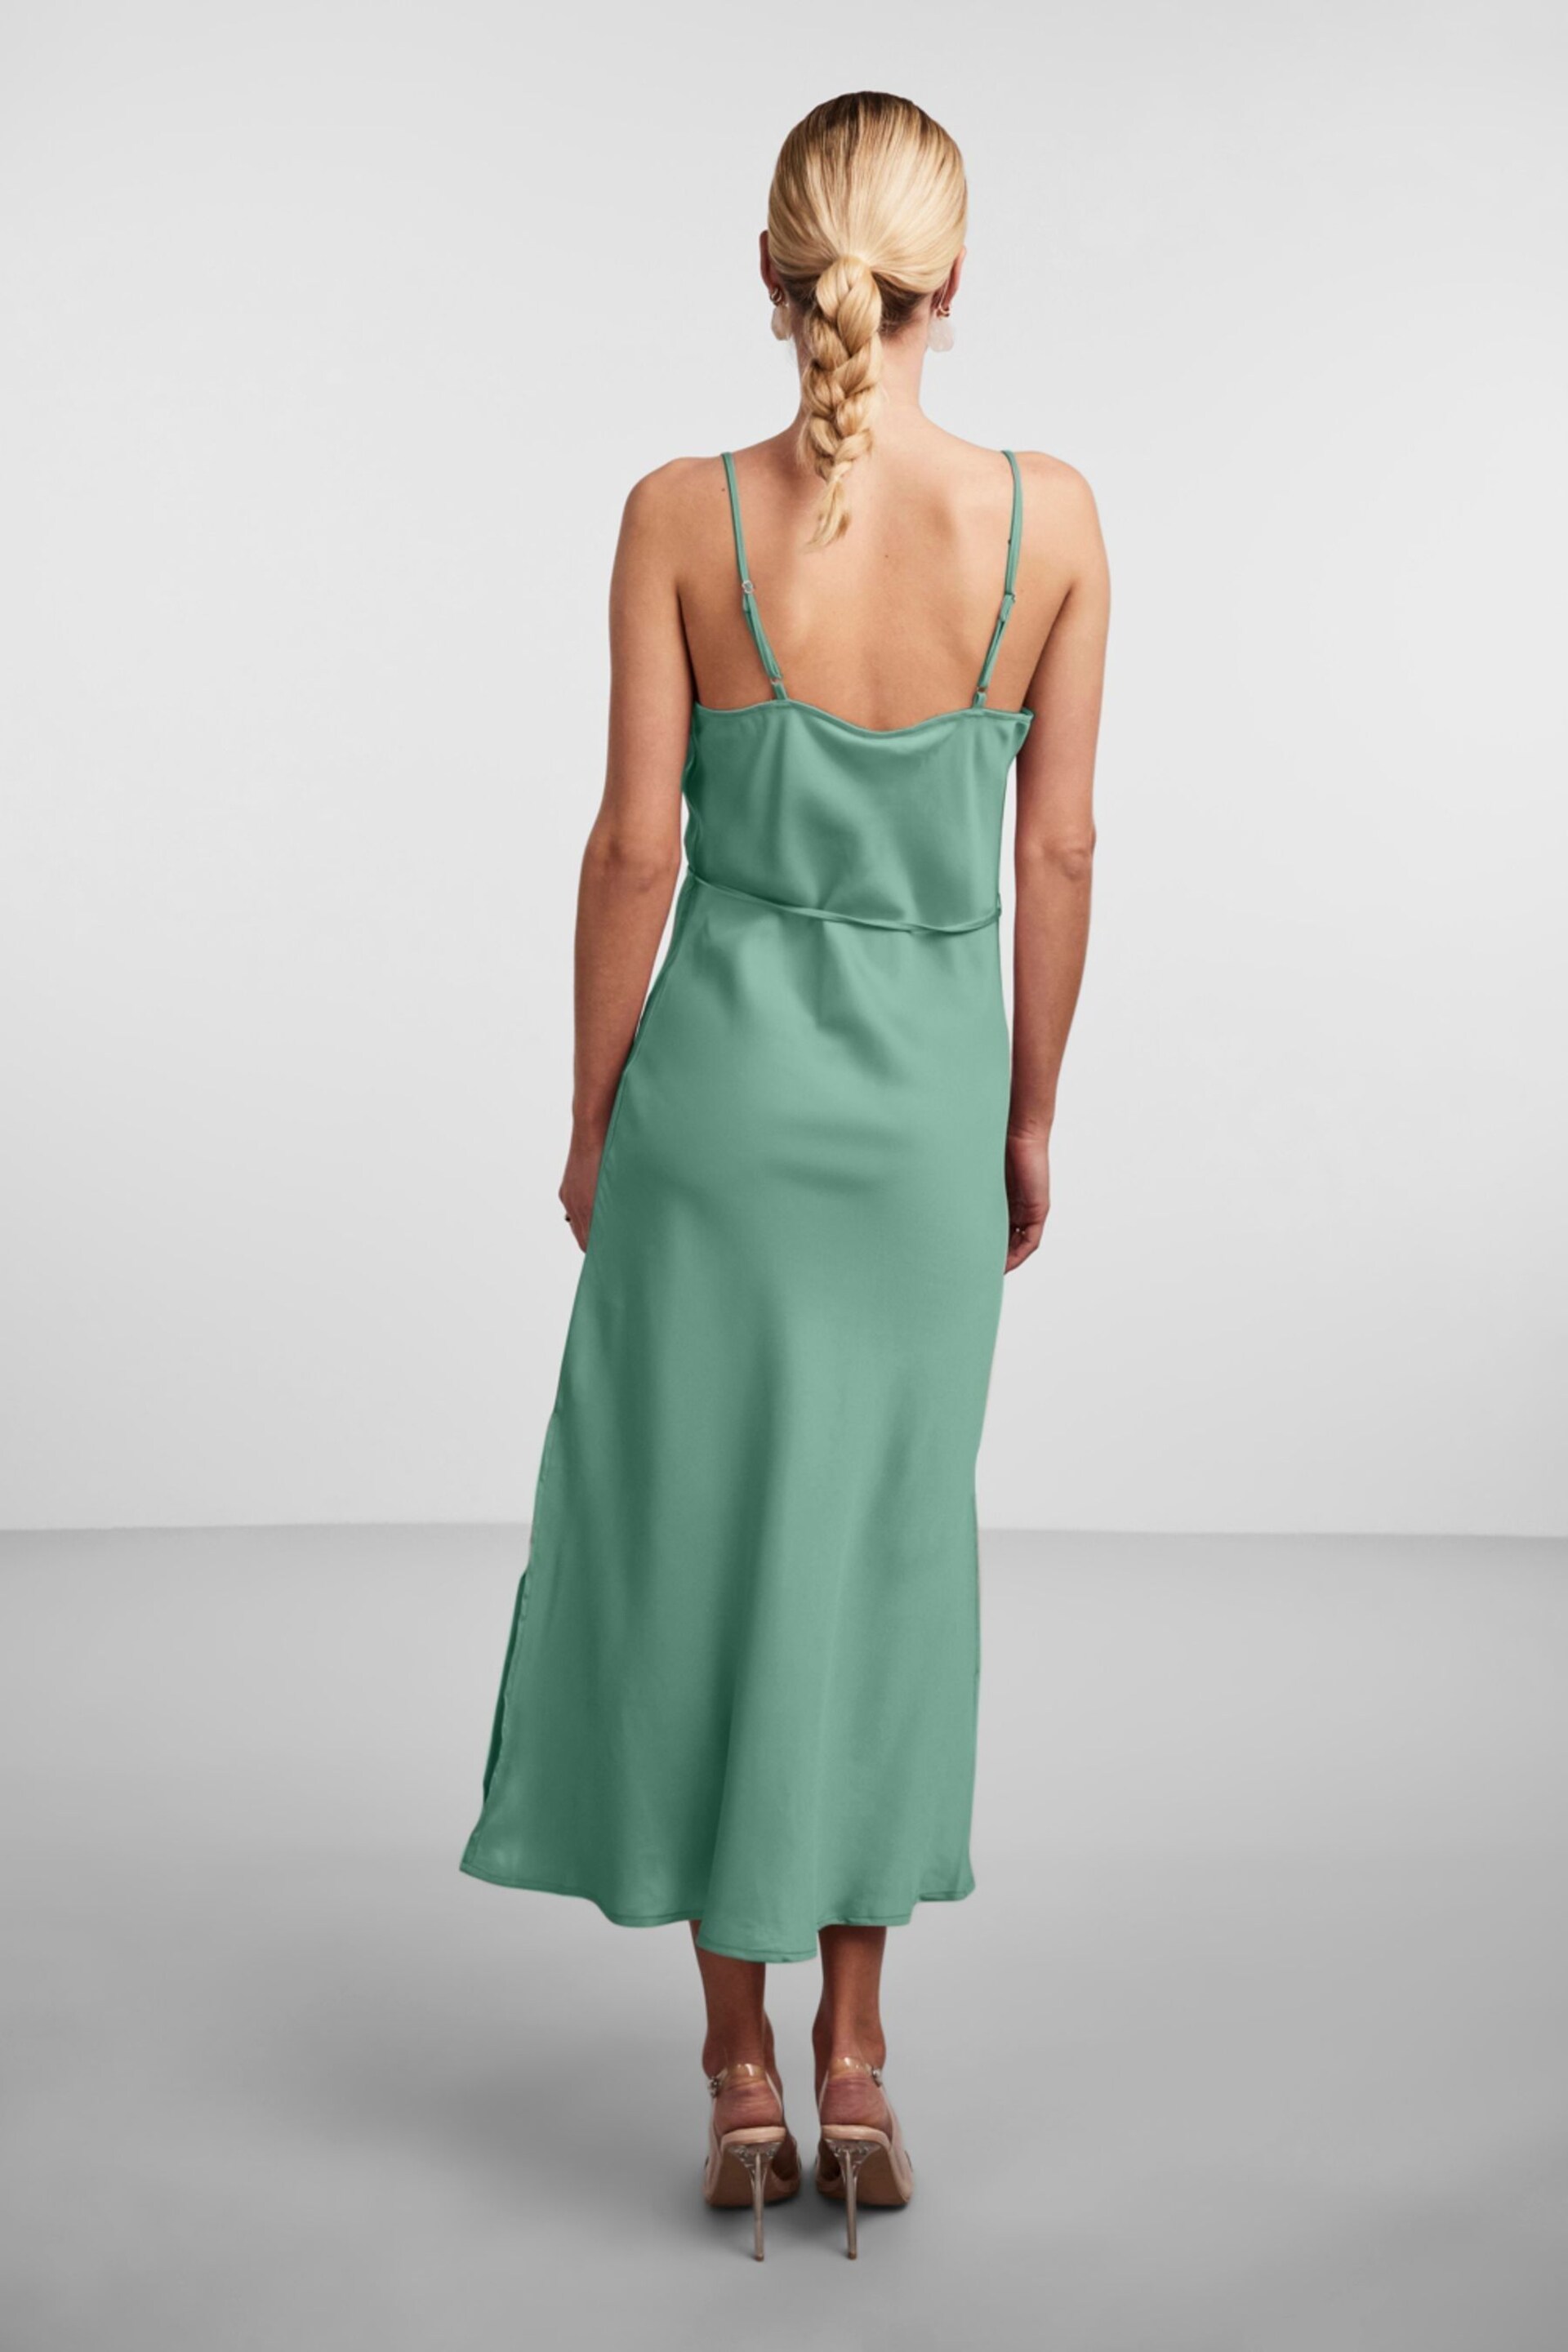 Y.A.S Green Satin Cowl Neck Slip Dress - Image 4 of 5